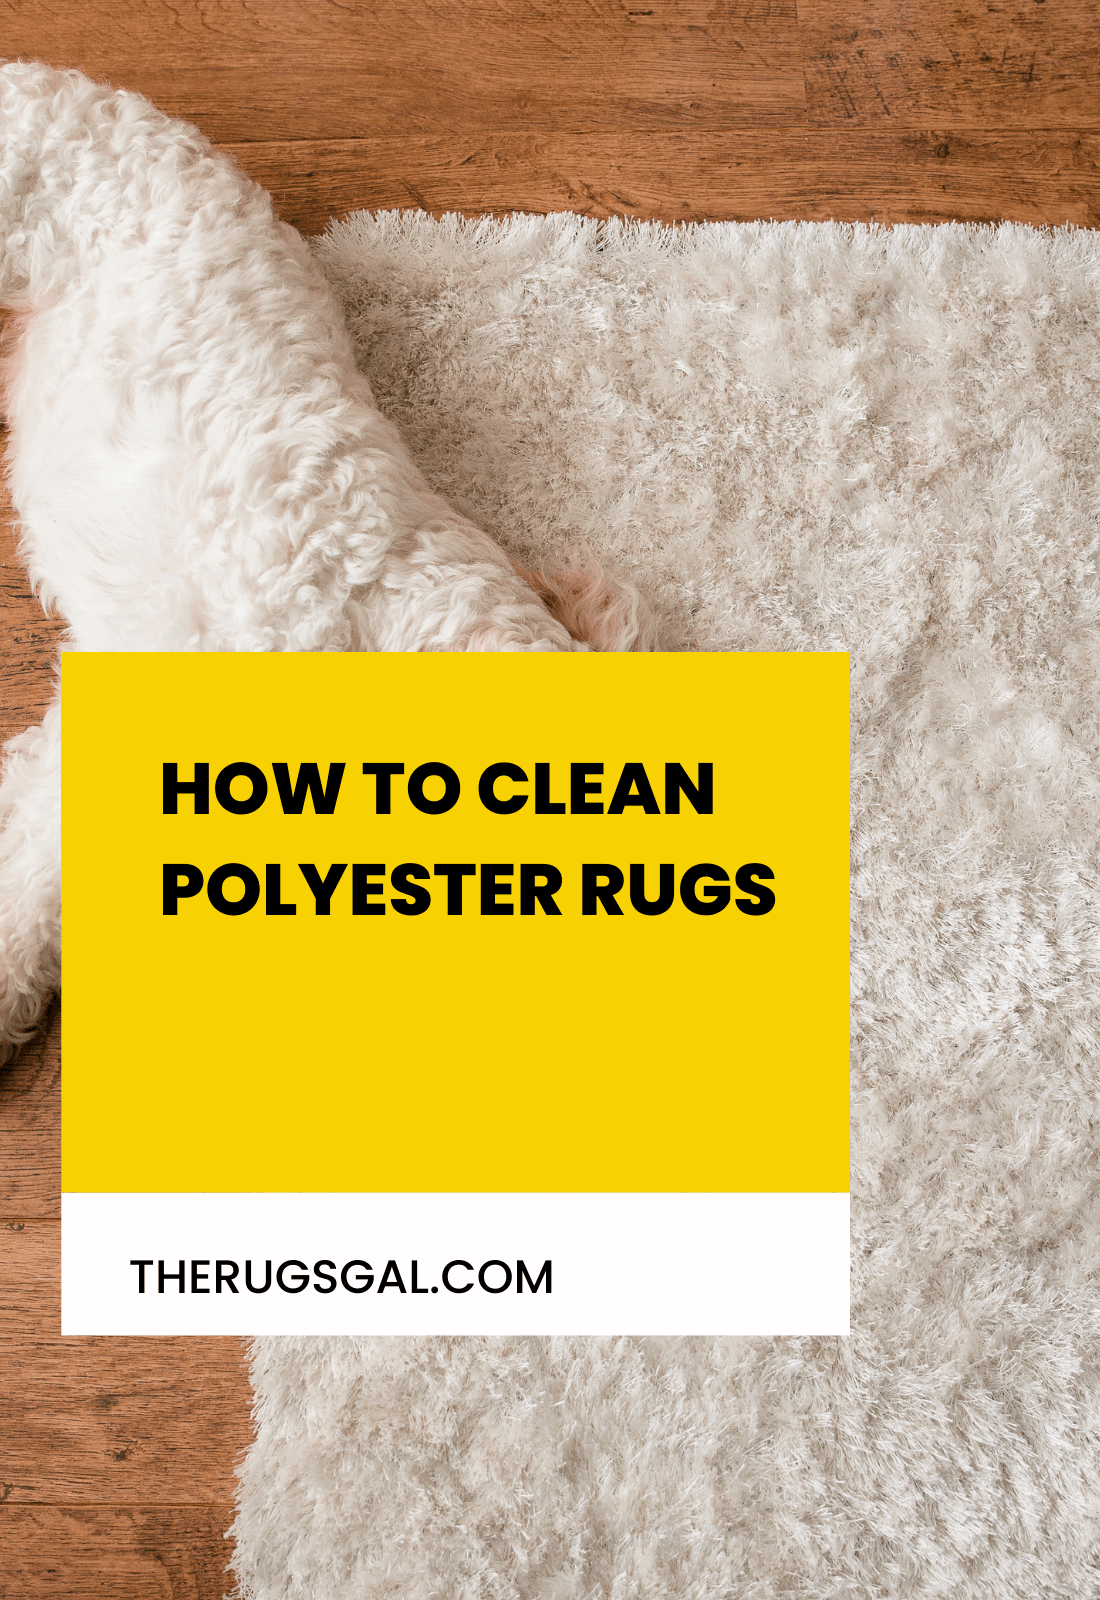 How to Clean Polyester Rugs